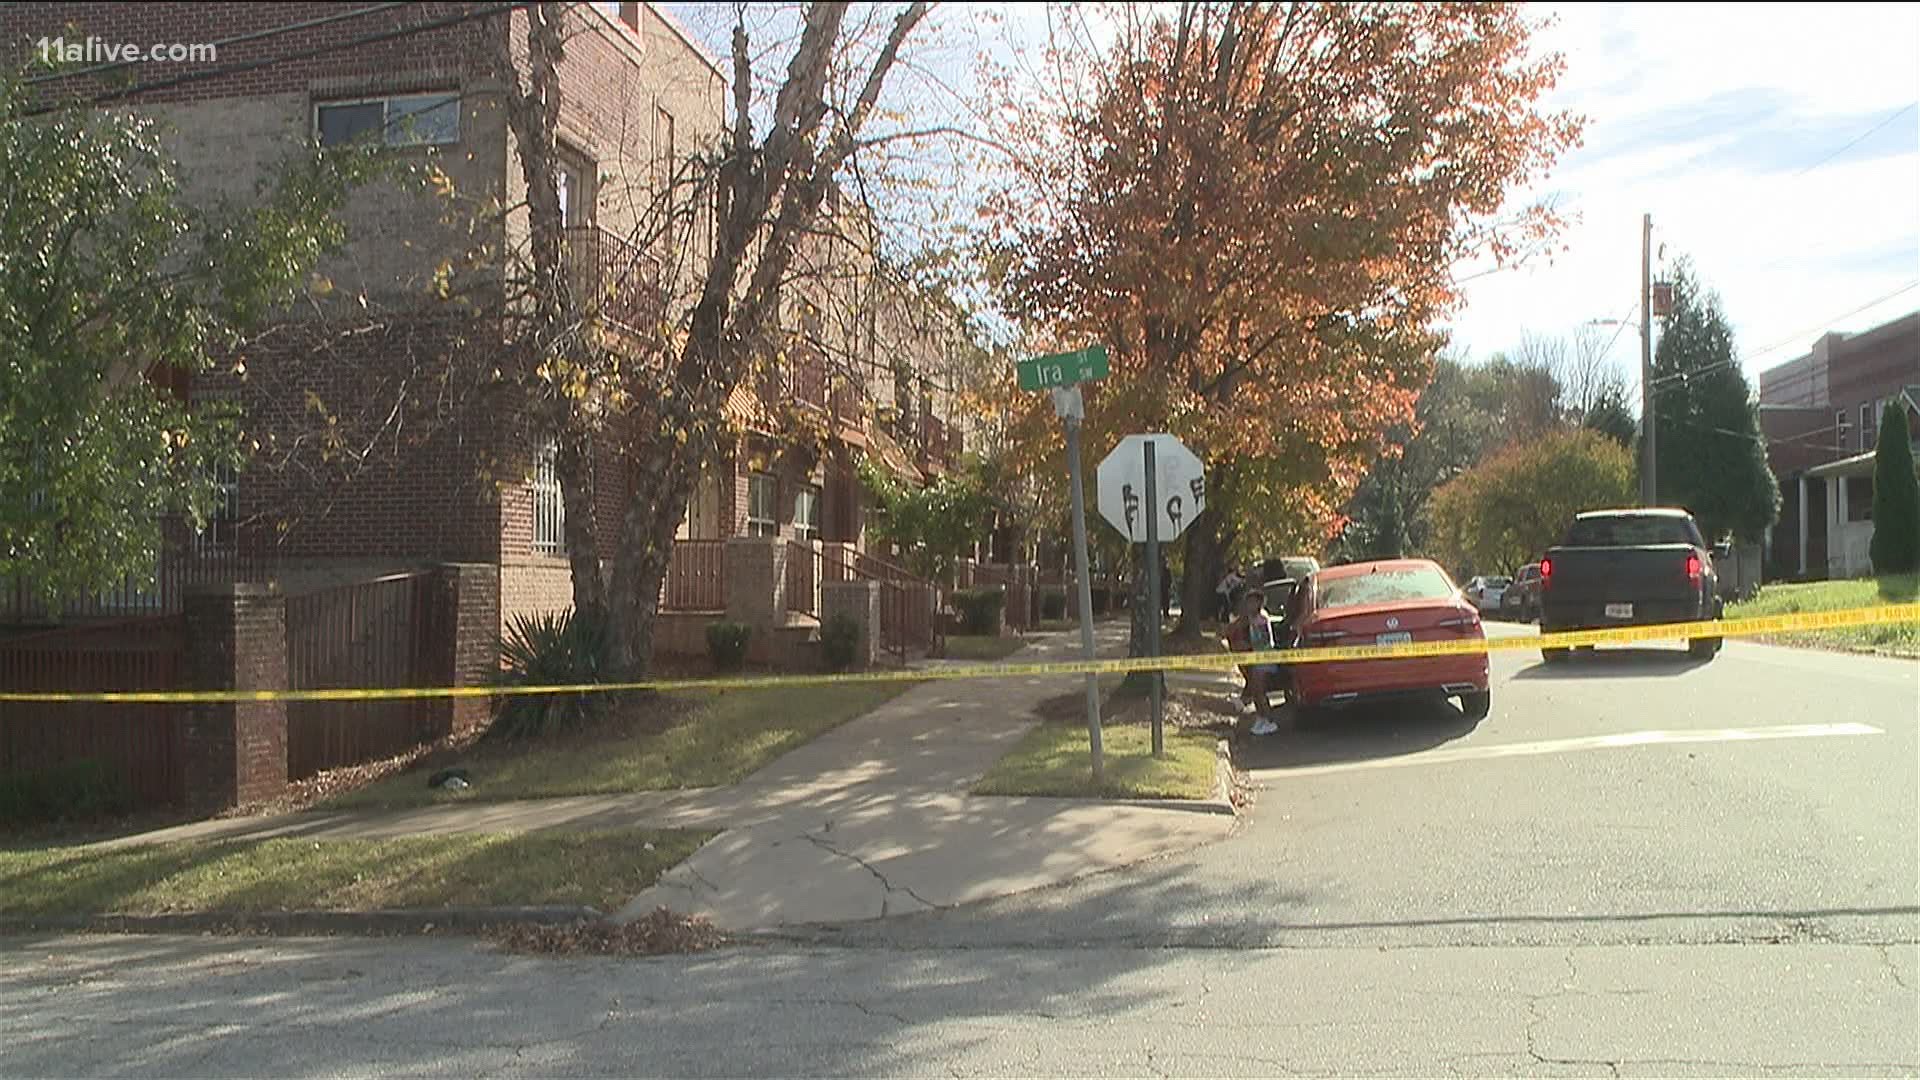 A 12-year-old Atlanta boy was shot in the leg Tuesday morning, police said, in an apparently inadvertent incident in Mechanicsville.